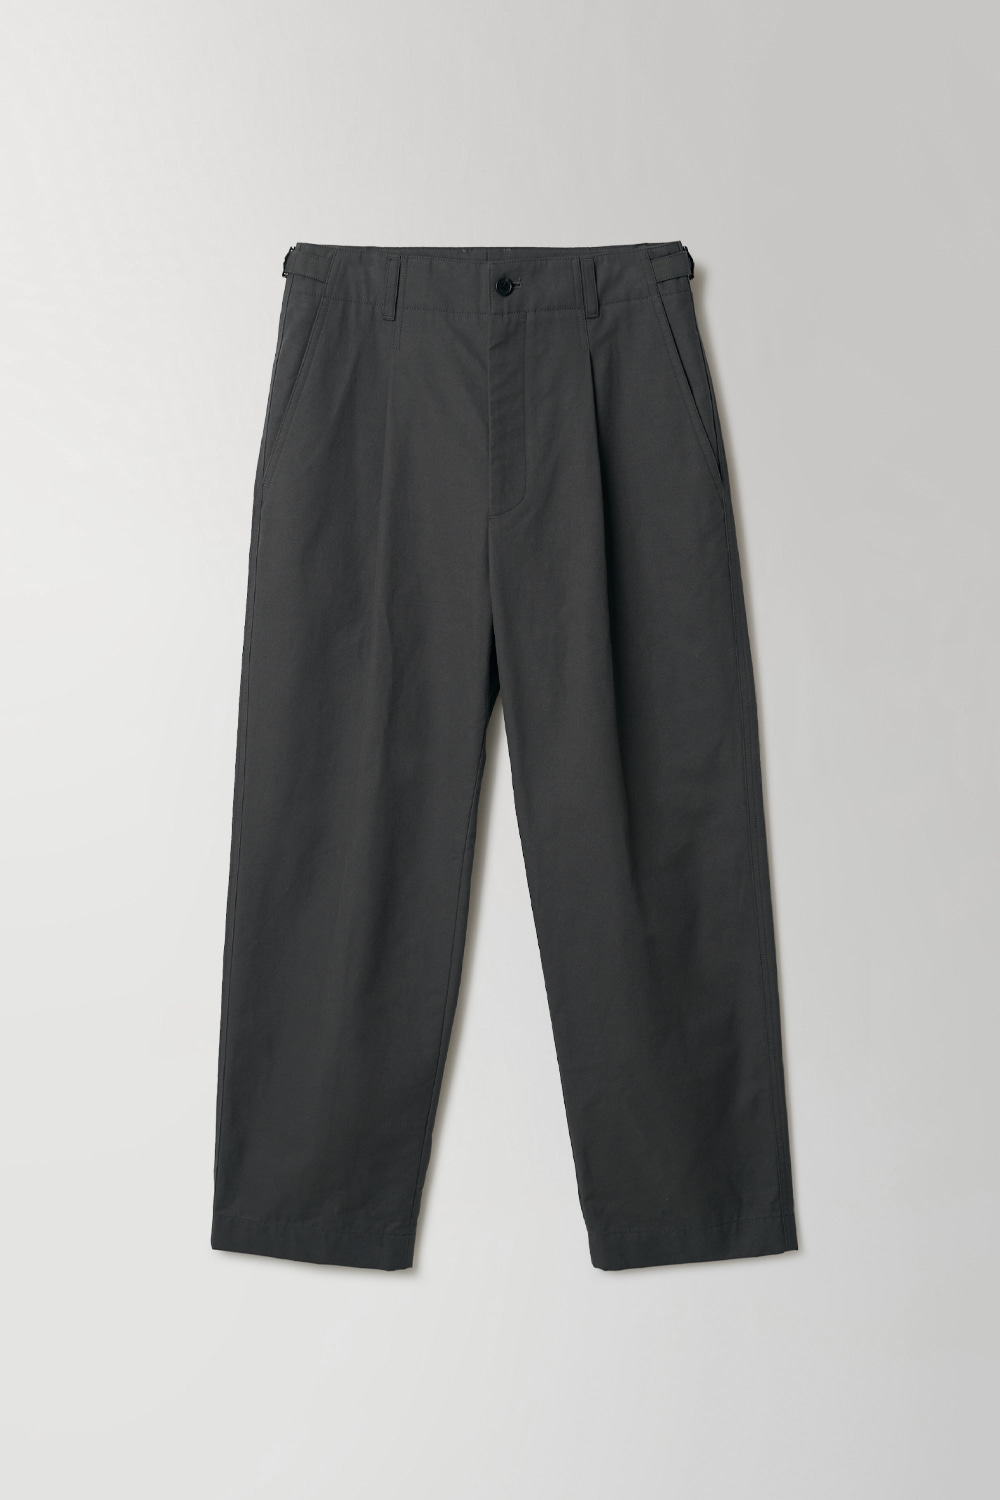 [2ND] STRUCTURED CHINO PANTS - CHARCOAL